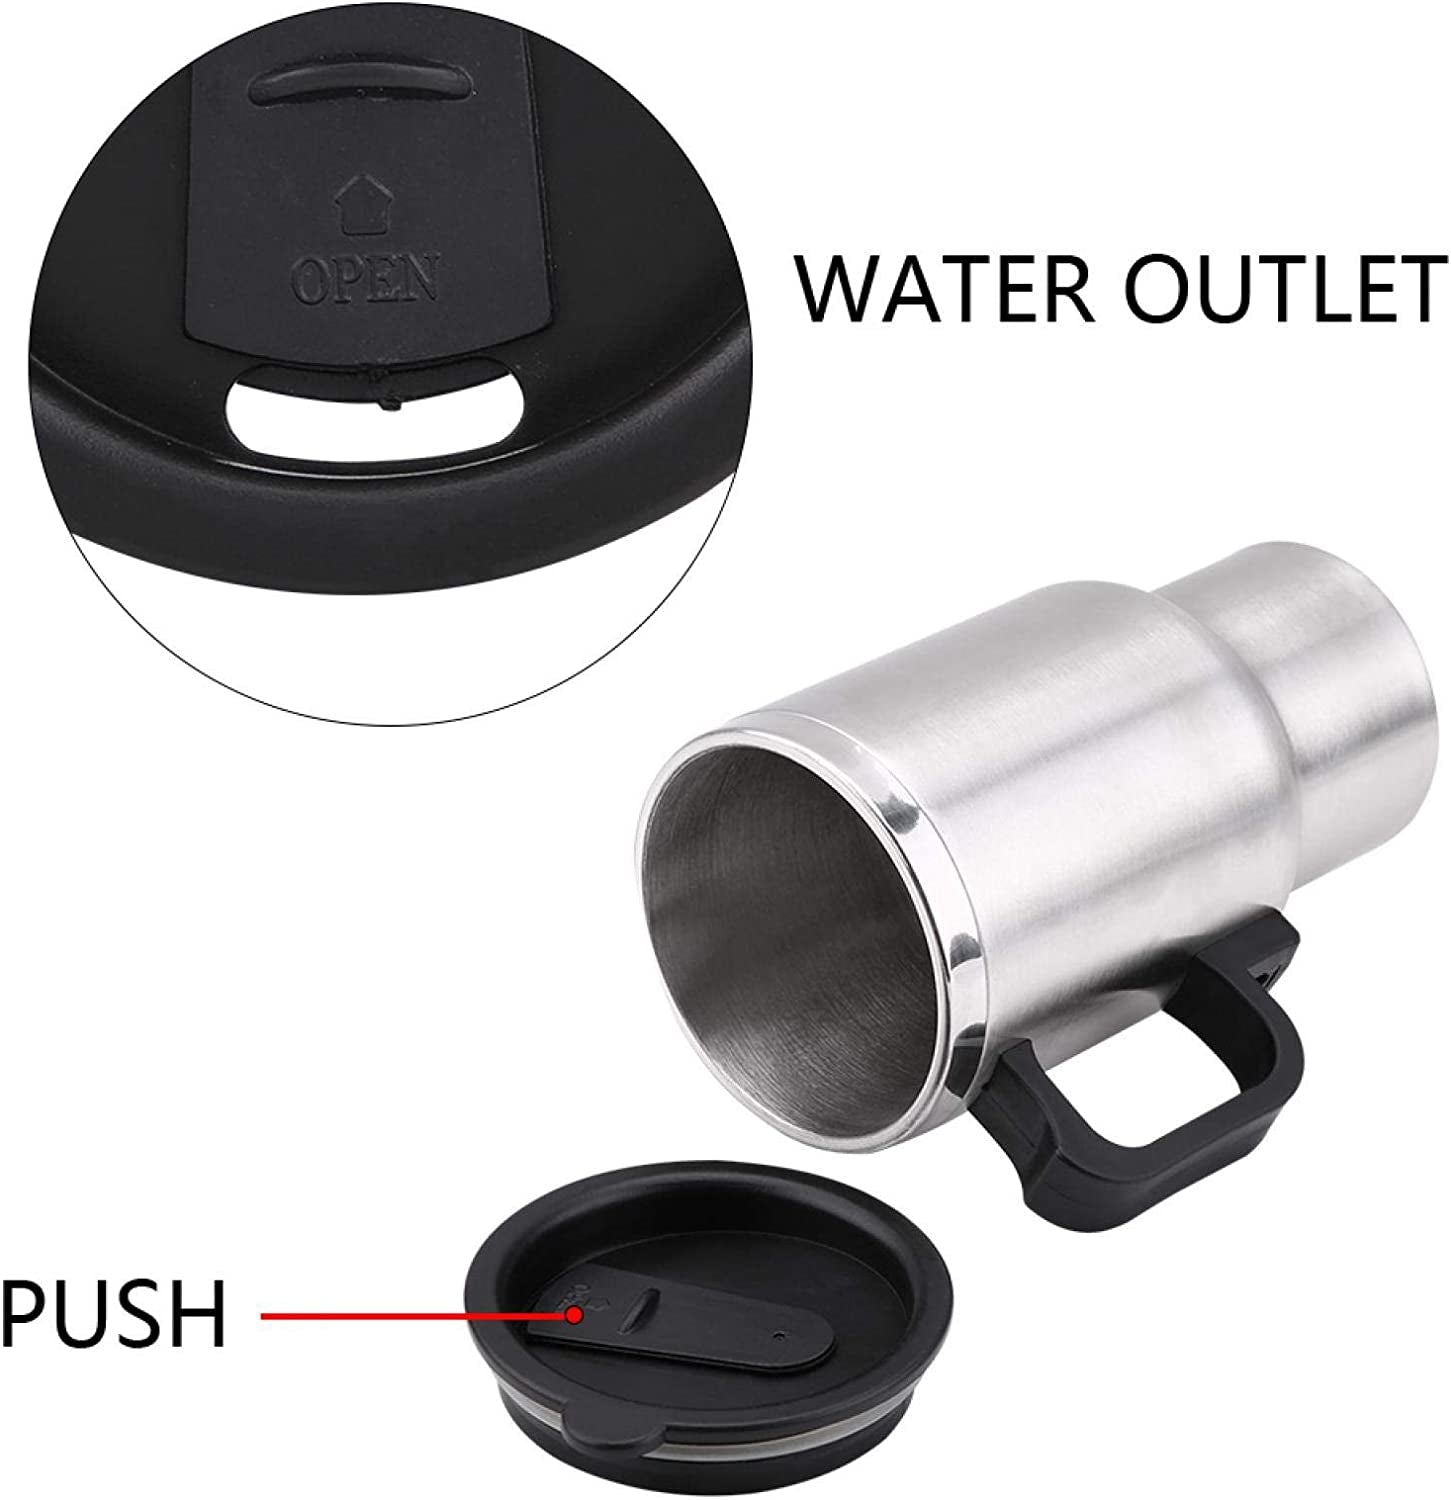 12V Car Kettle, Portable 450Ml Car Kettle Boiler Stainless Steel Electric Kettle Heating Travel Cup Coffee Mug, Electric Teapot Quick Boiling